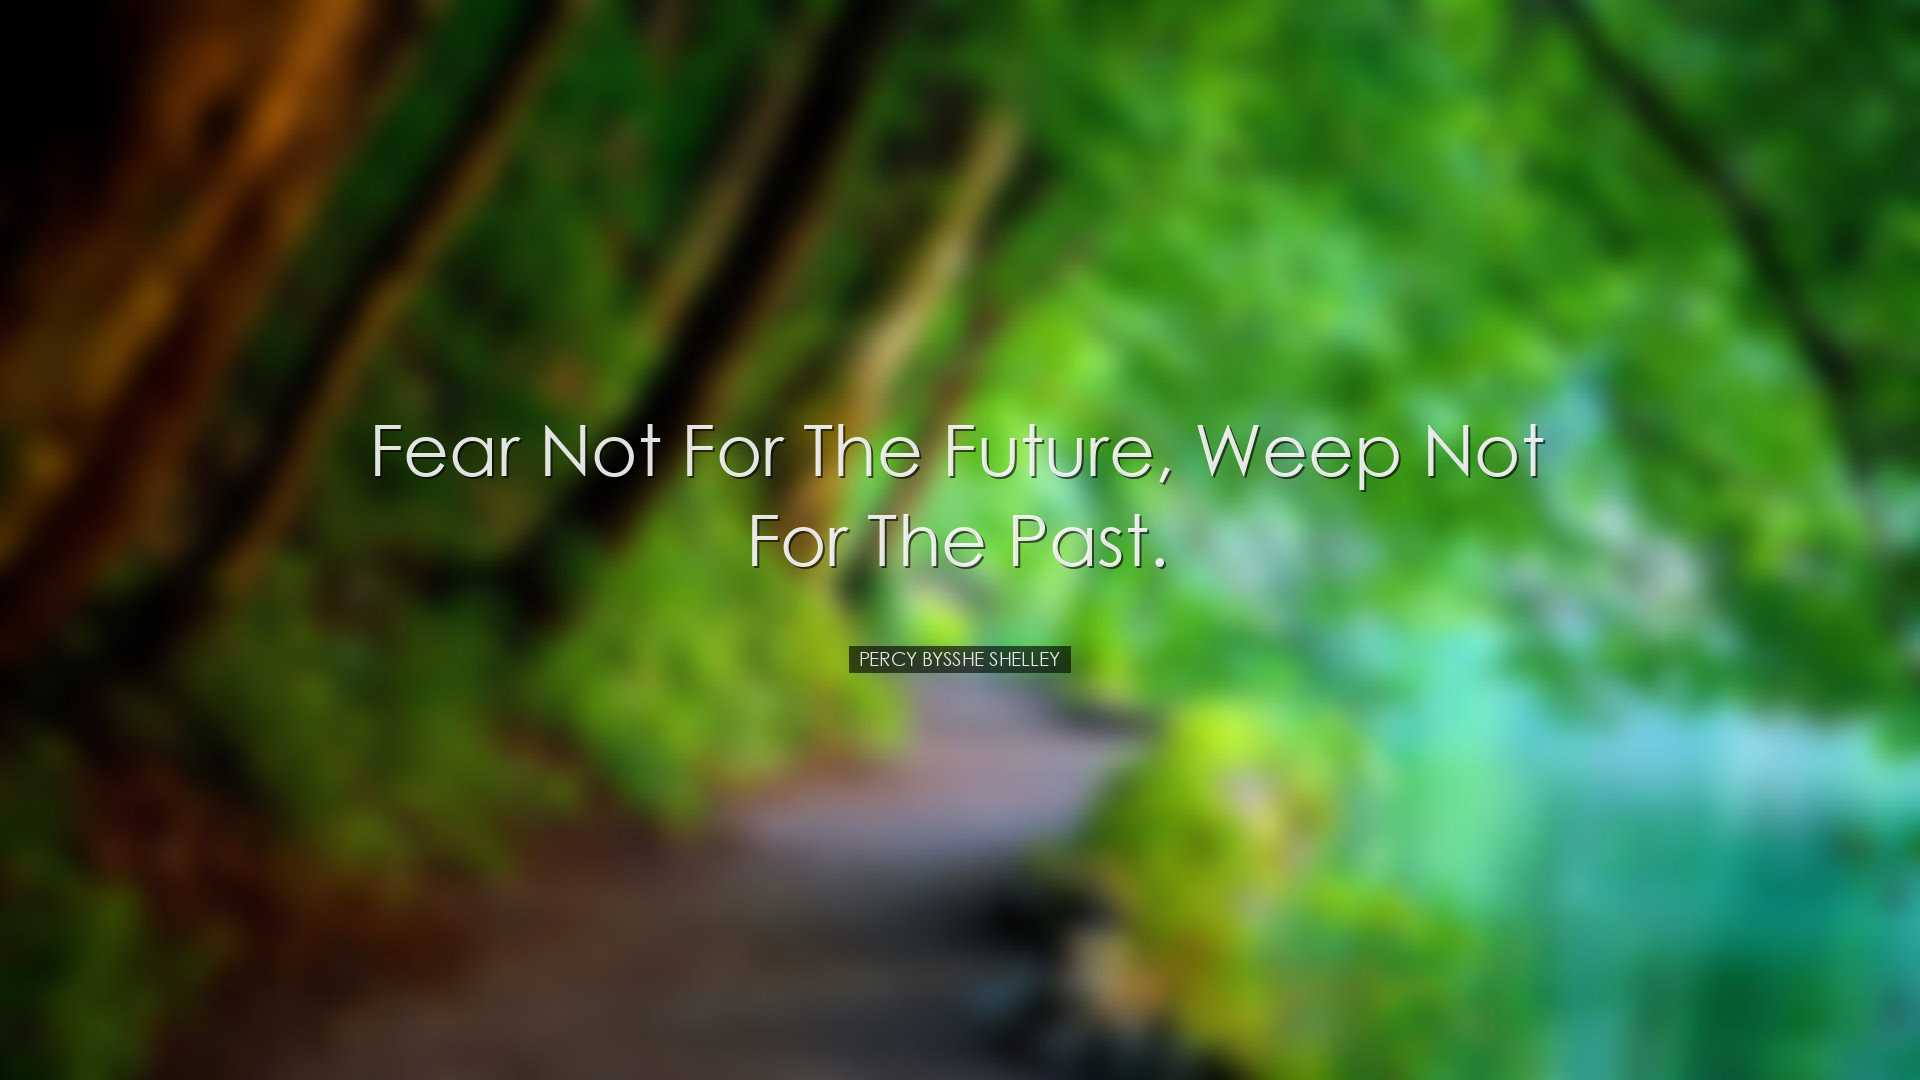 Fear not for the future, weep not for the past. - Percy Bysshe She